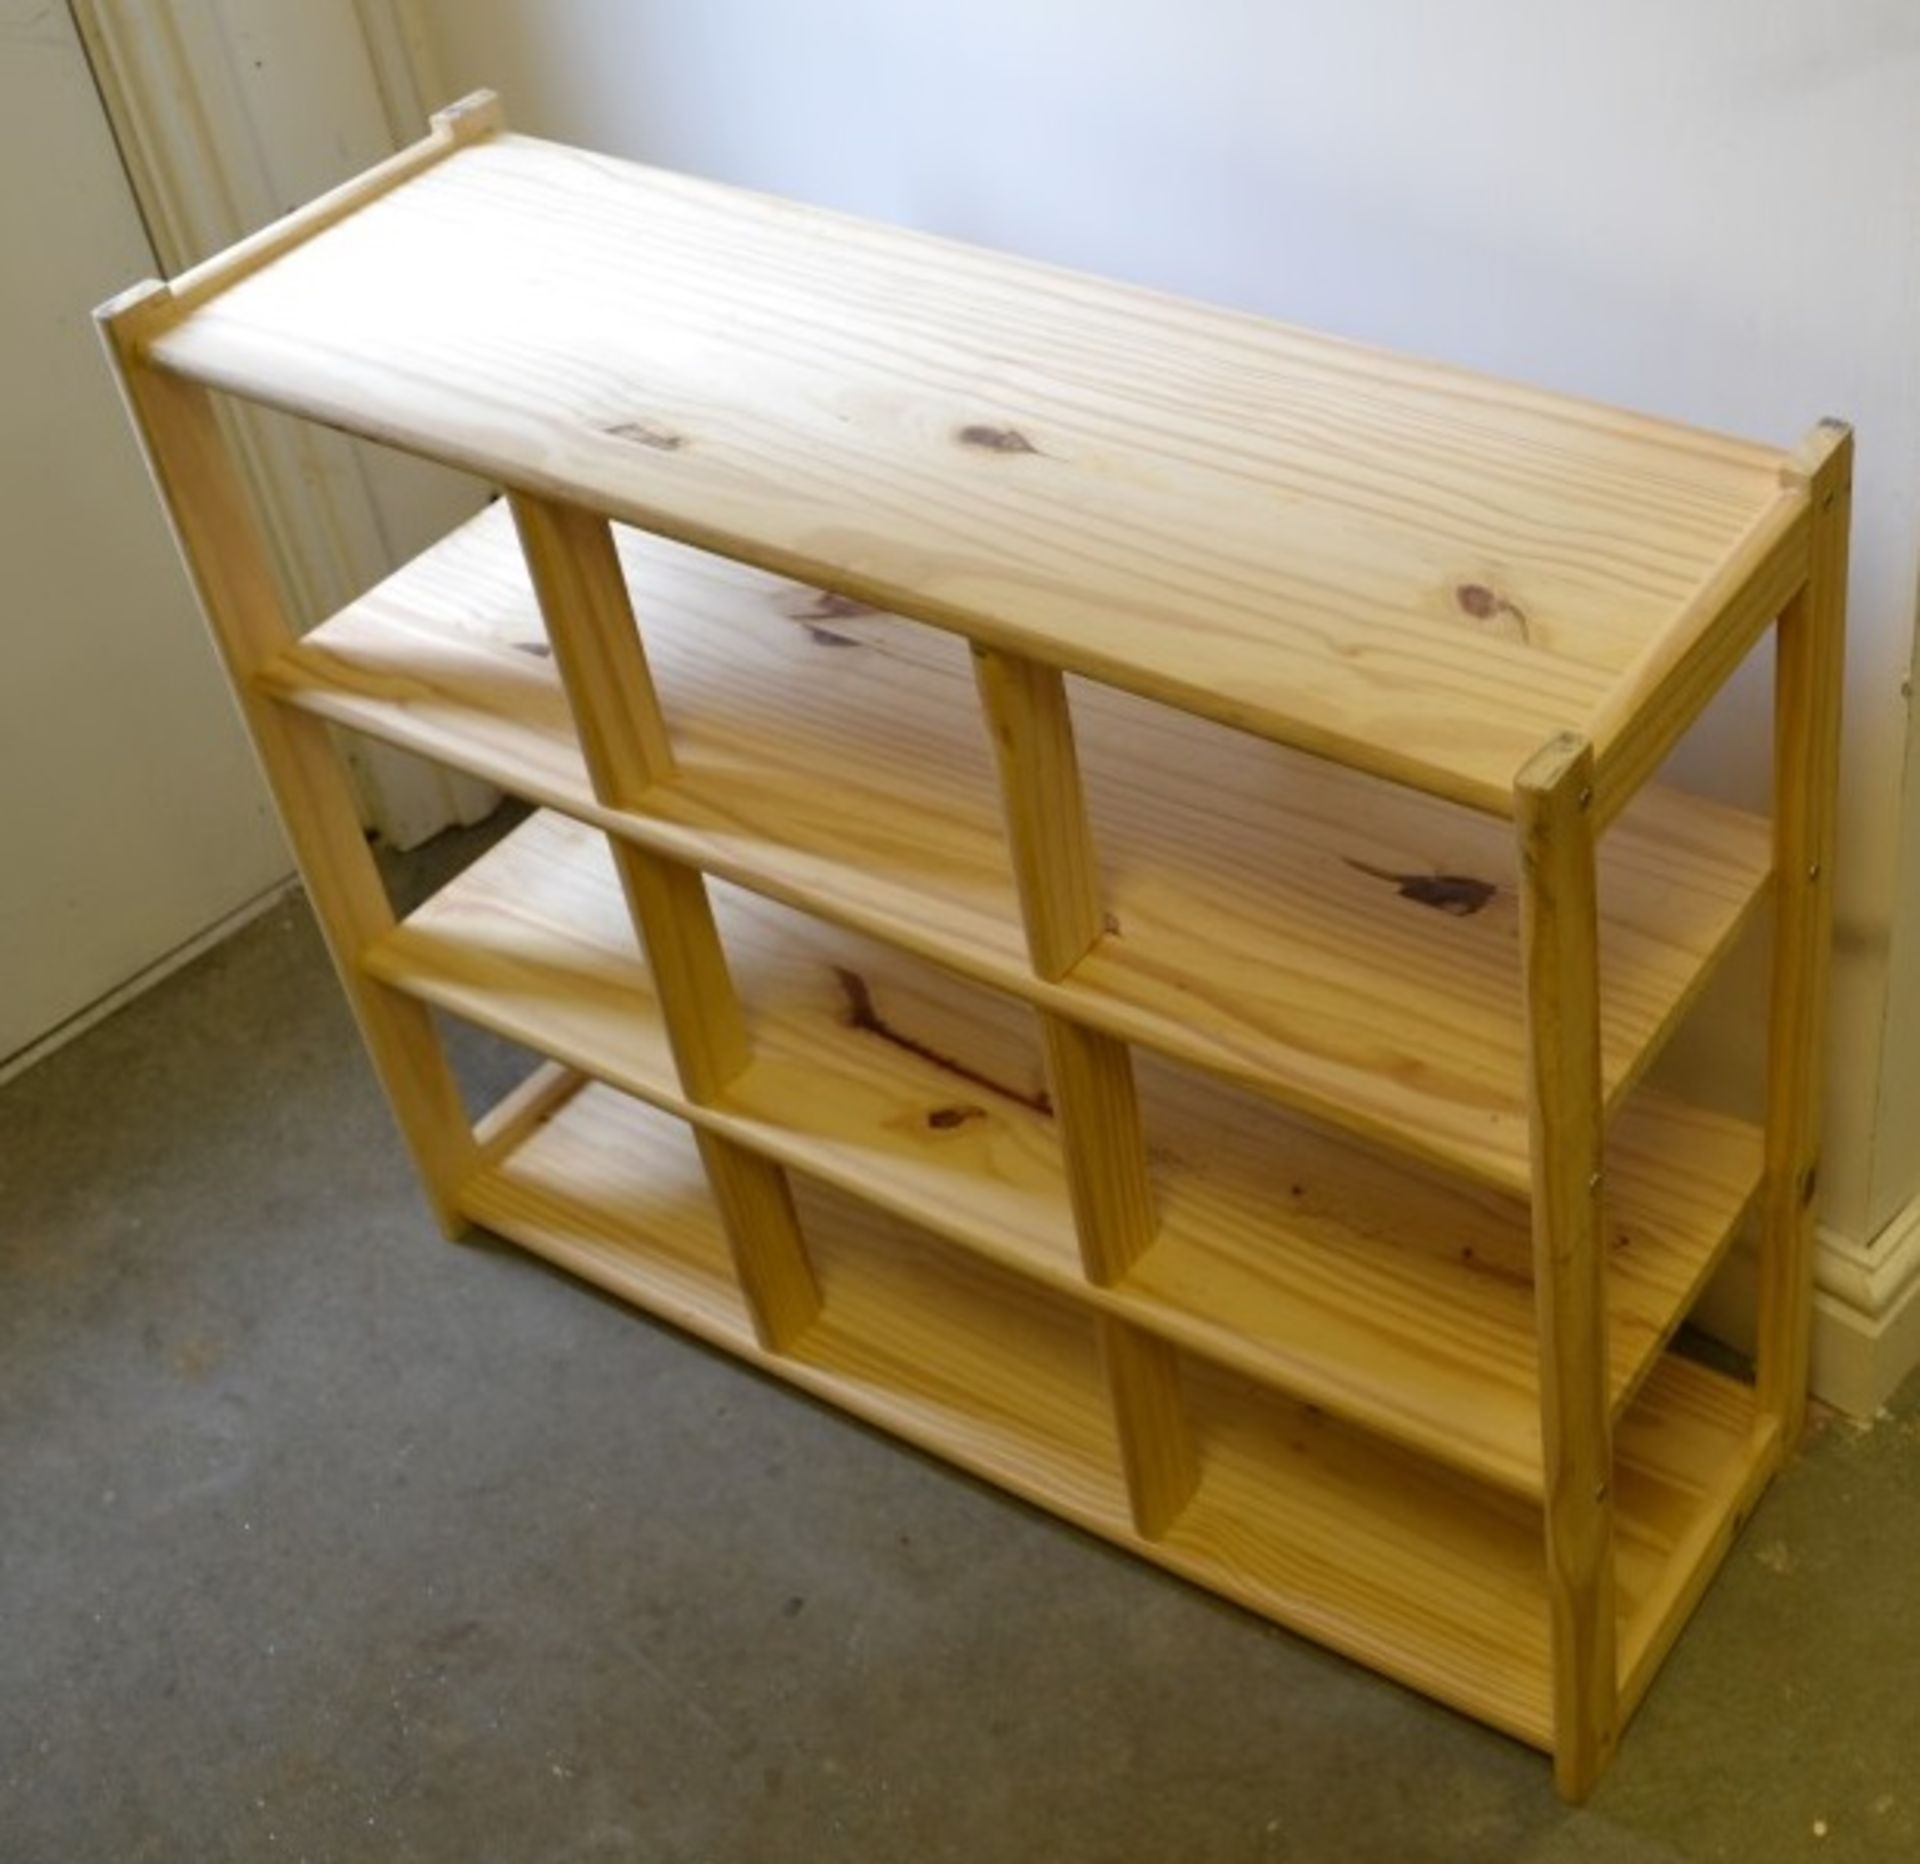 1 x Wooden Shoe Rack - From A Clean Manor House Environment In Good Condition - Dimensions: W84 x - Image 2 of 2